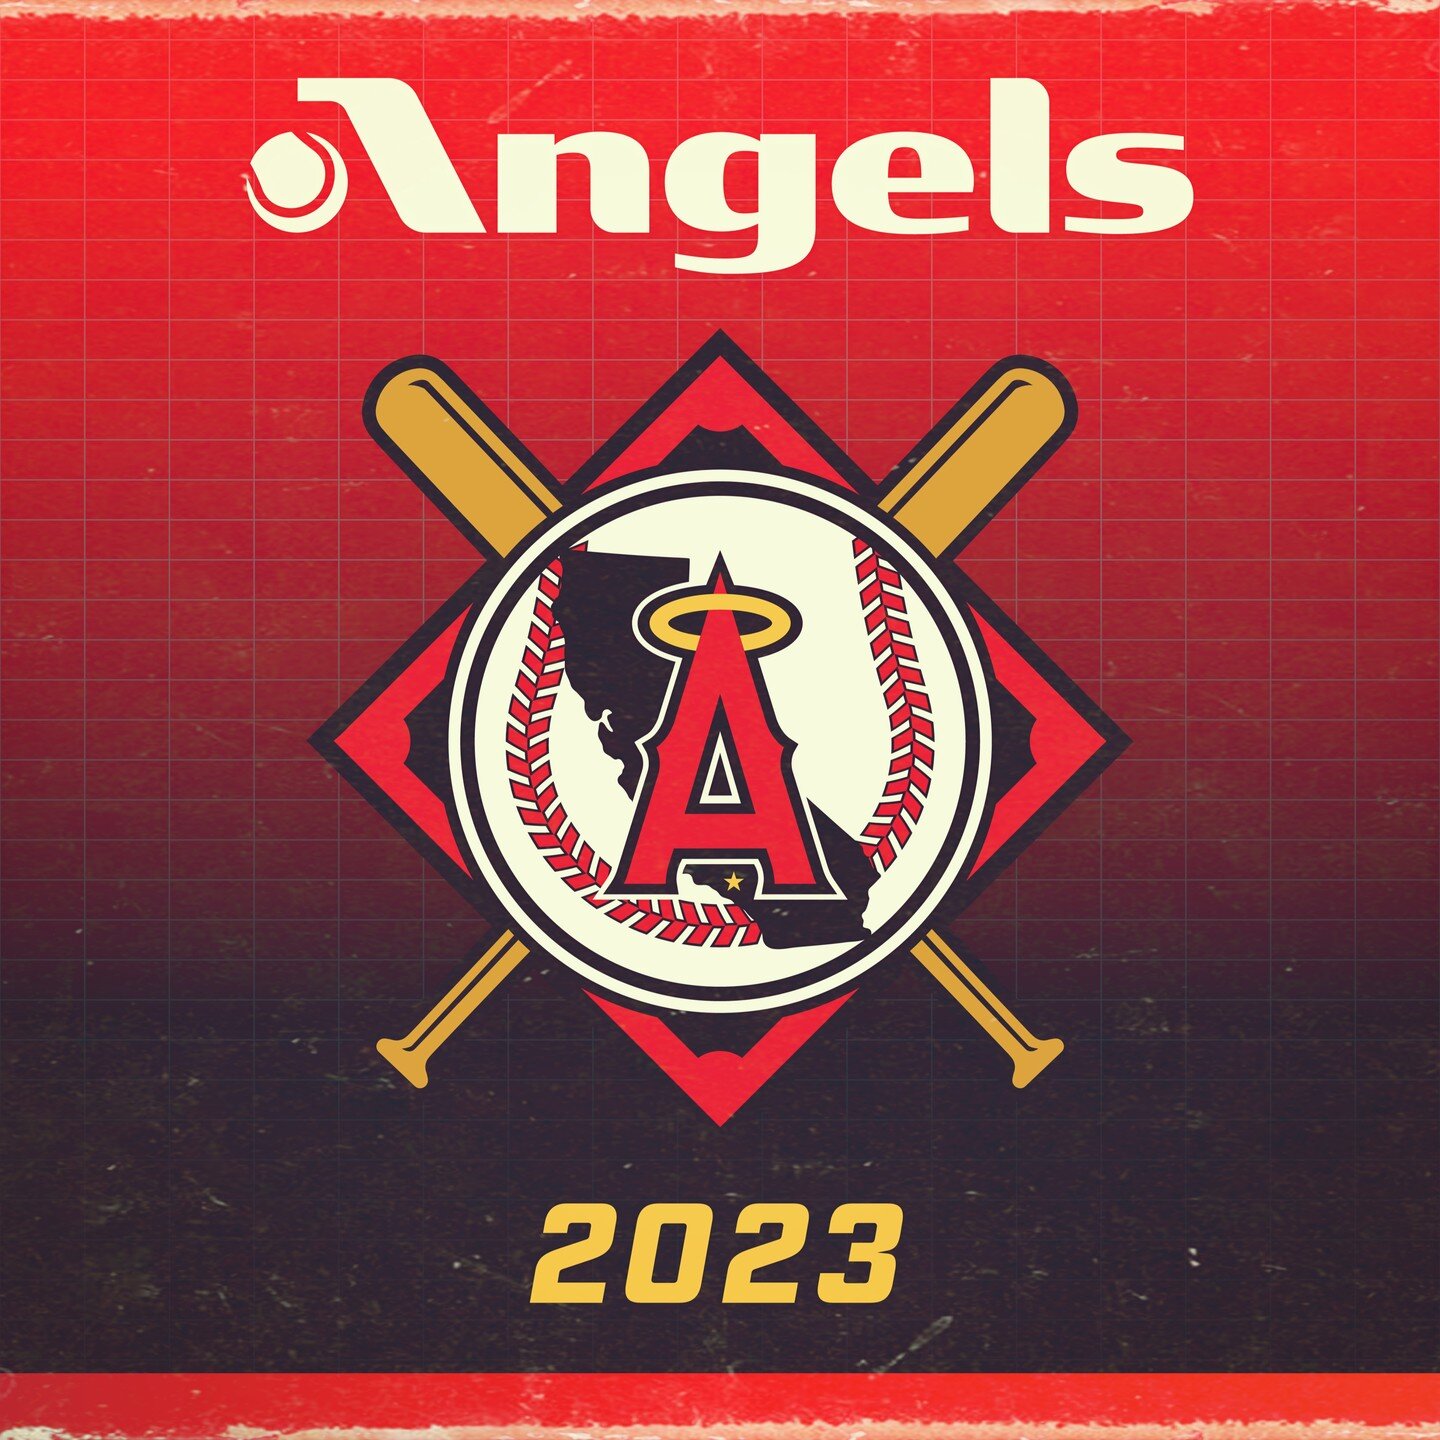 It's baseball season y'all! Happy #OpeningDay

Excited to see as many @Angels games as I can this year! Hopefully the crew stays healthy &amp; I can see some games in October too! 😁

Let's Goooo Halos!!